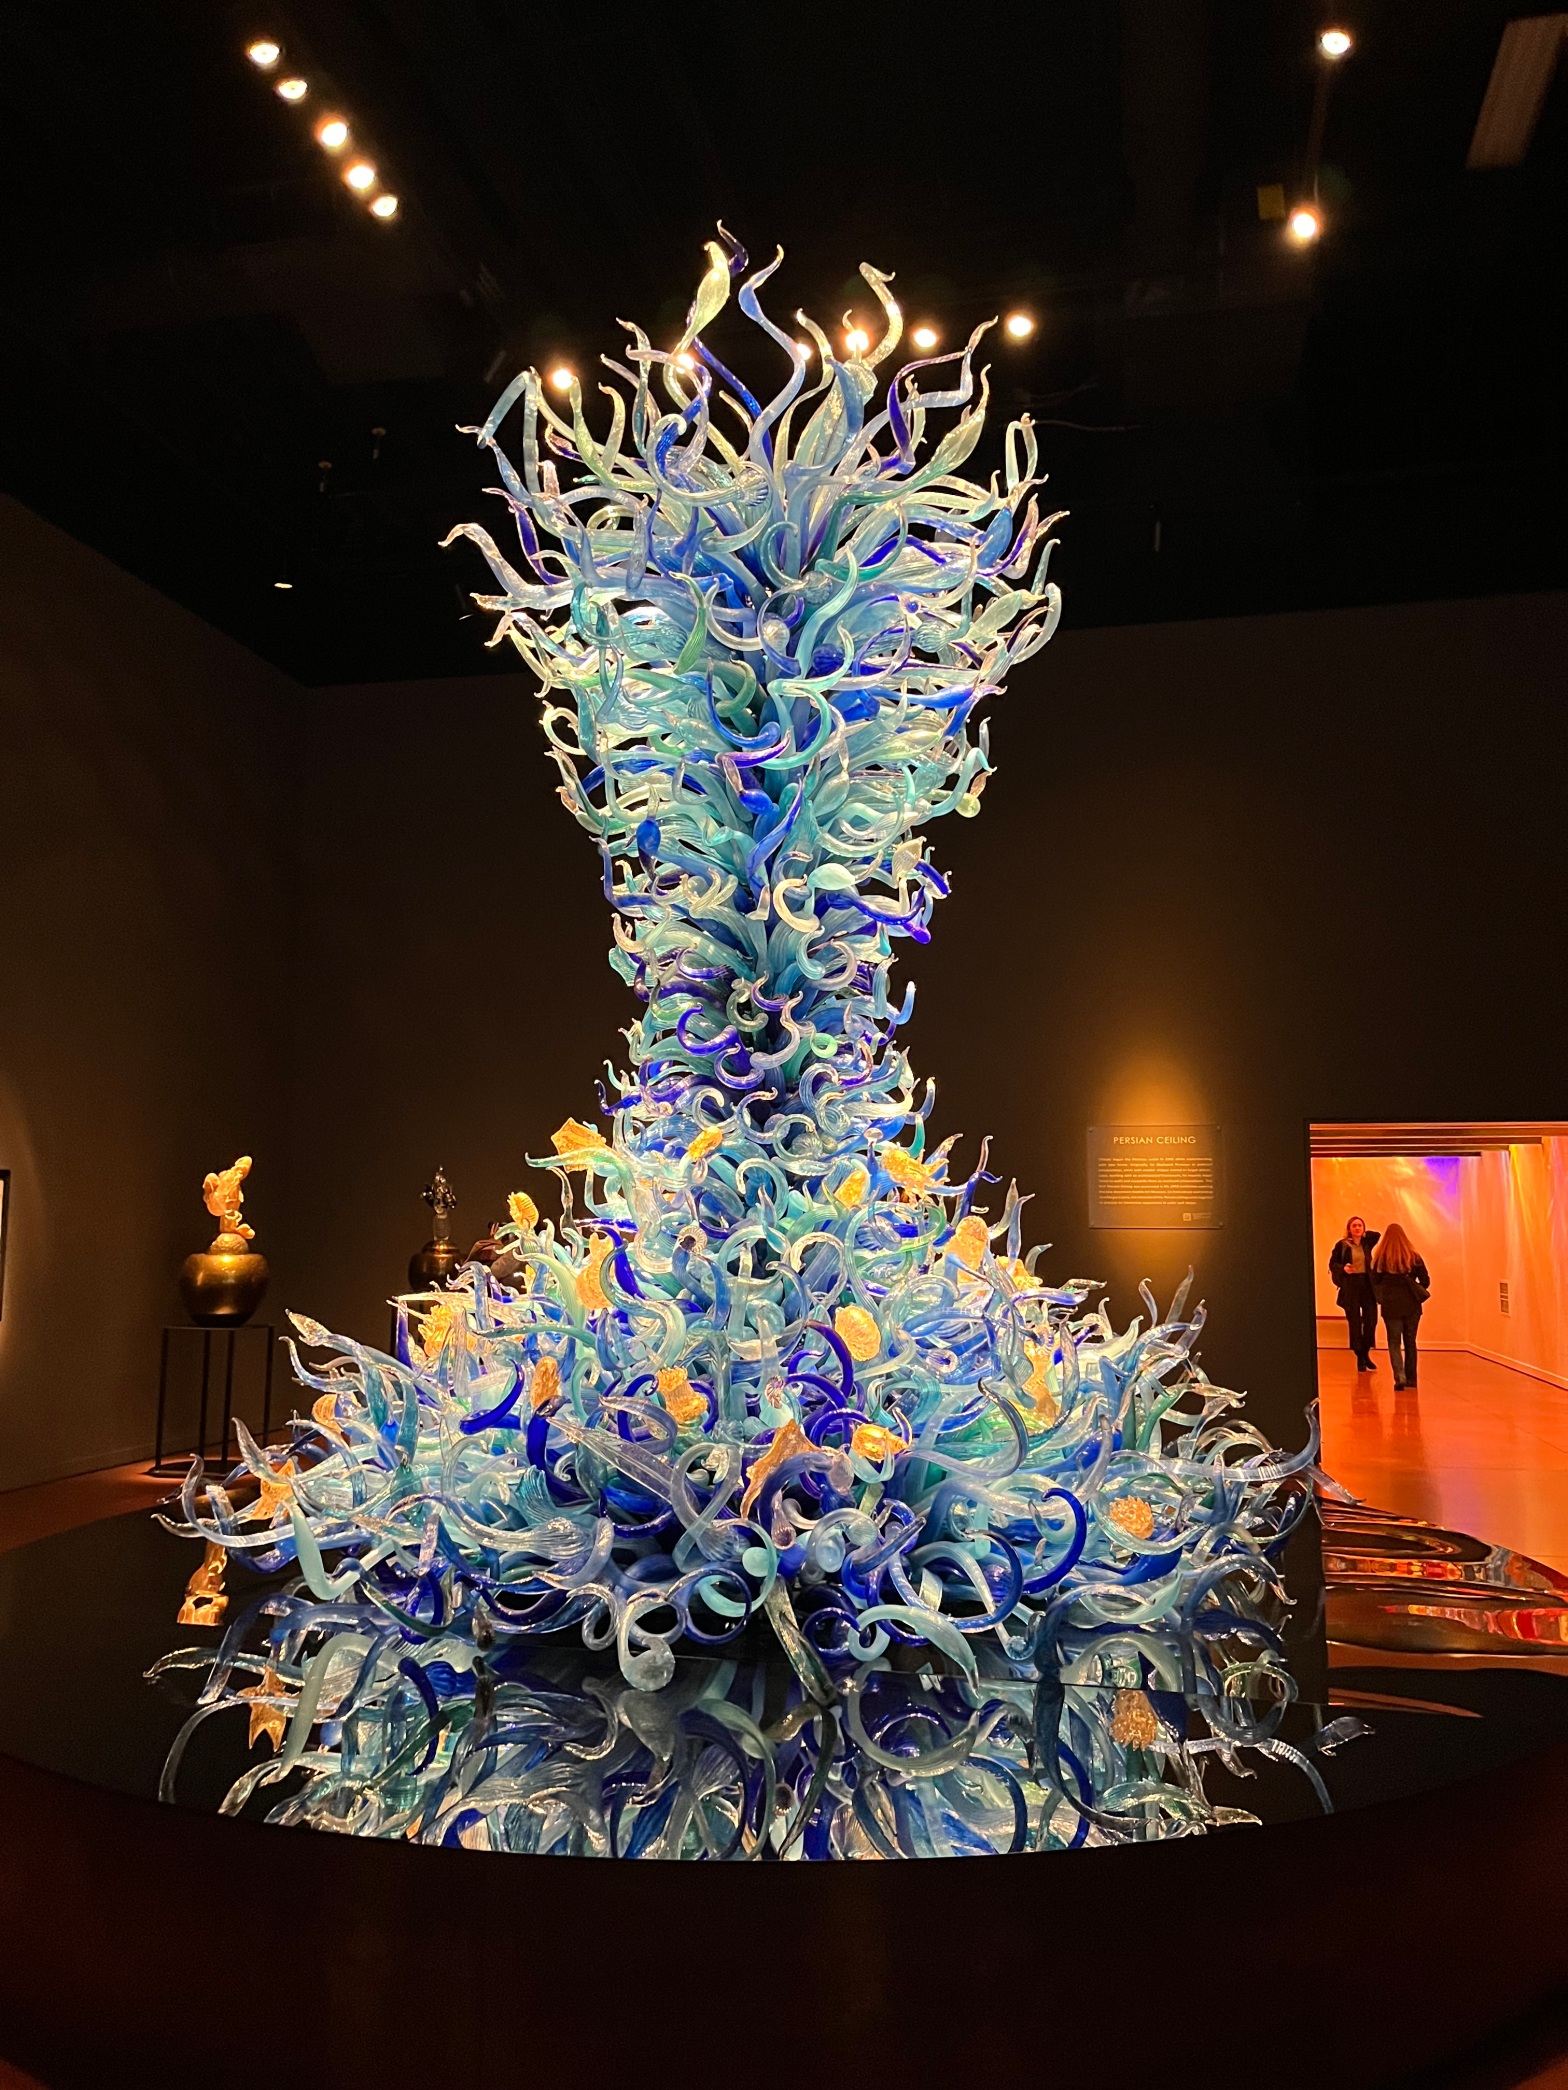 A floor to ceiling glass sculpture by Dale Chihuly at the Seattle glass museum. Each piece of glass is a large tendril coming out of a central tornado-like structure. The pieces of glass are various hues of blue. There are gold glass sculptures at the bottom of starfish and nautilus.